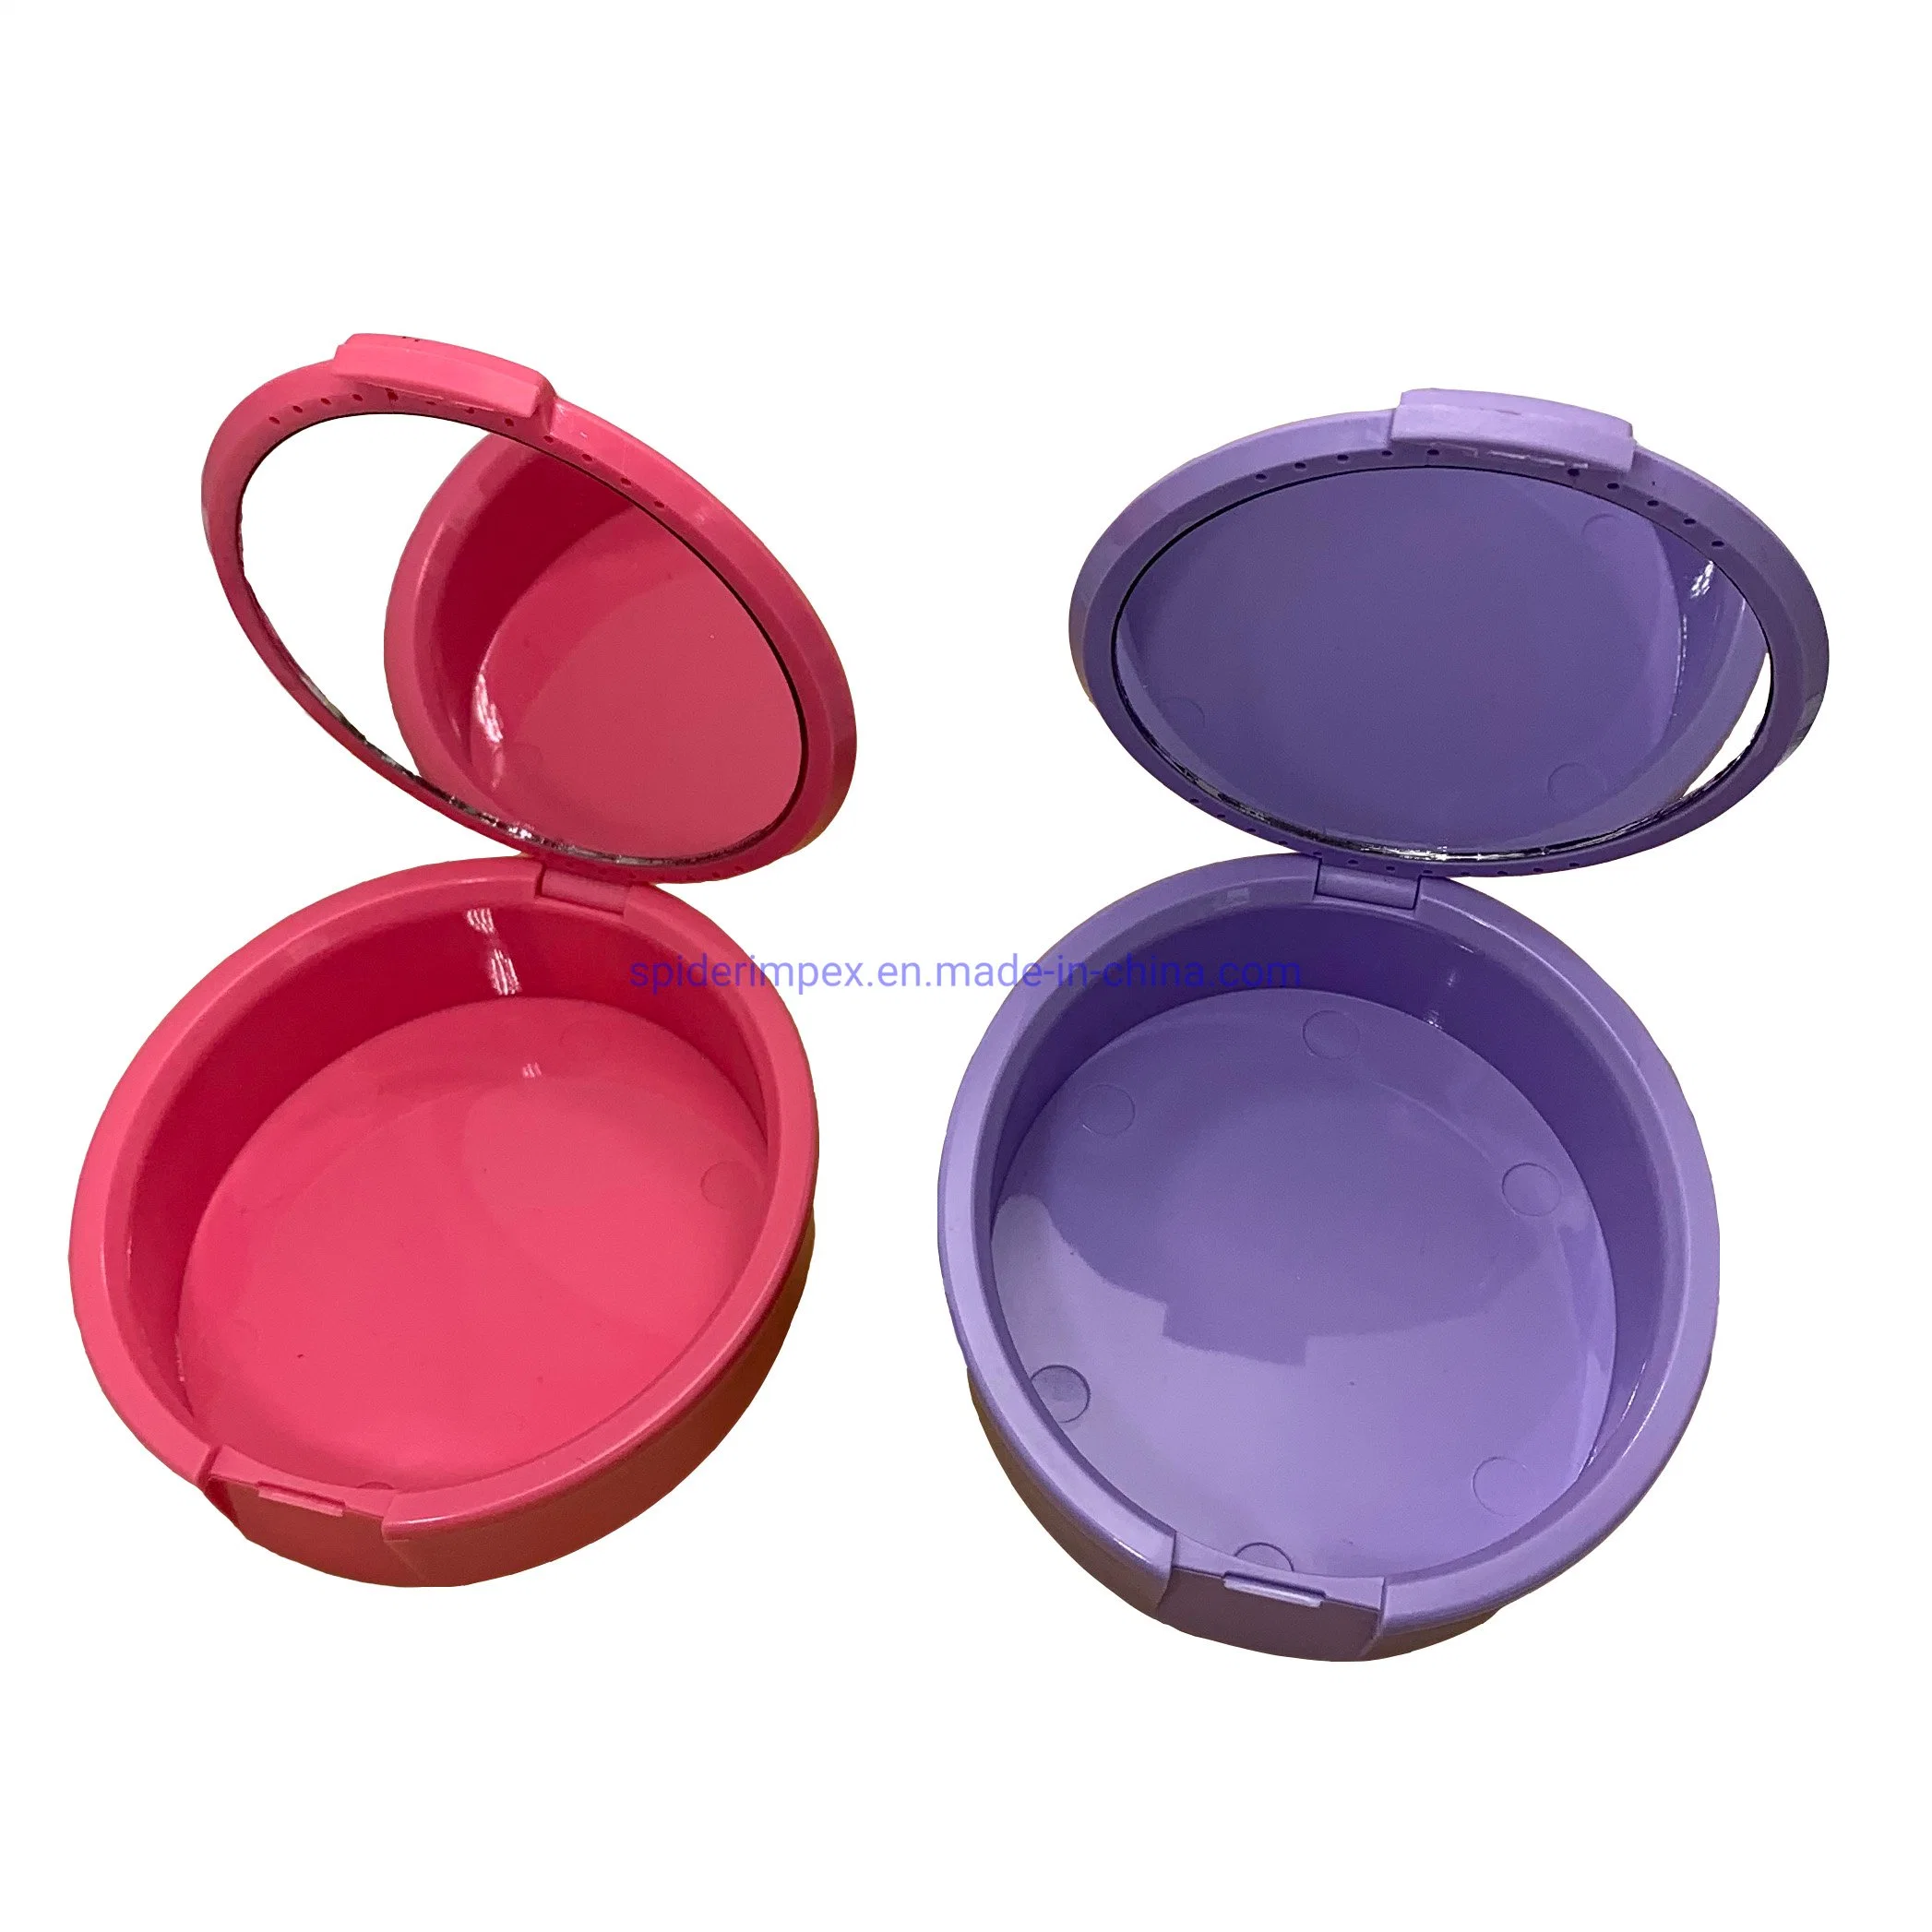 Hot Selling Round Shape Dental Retainer Case with Mirror